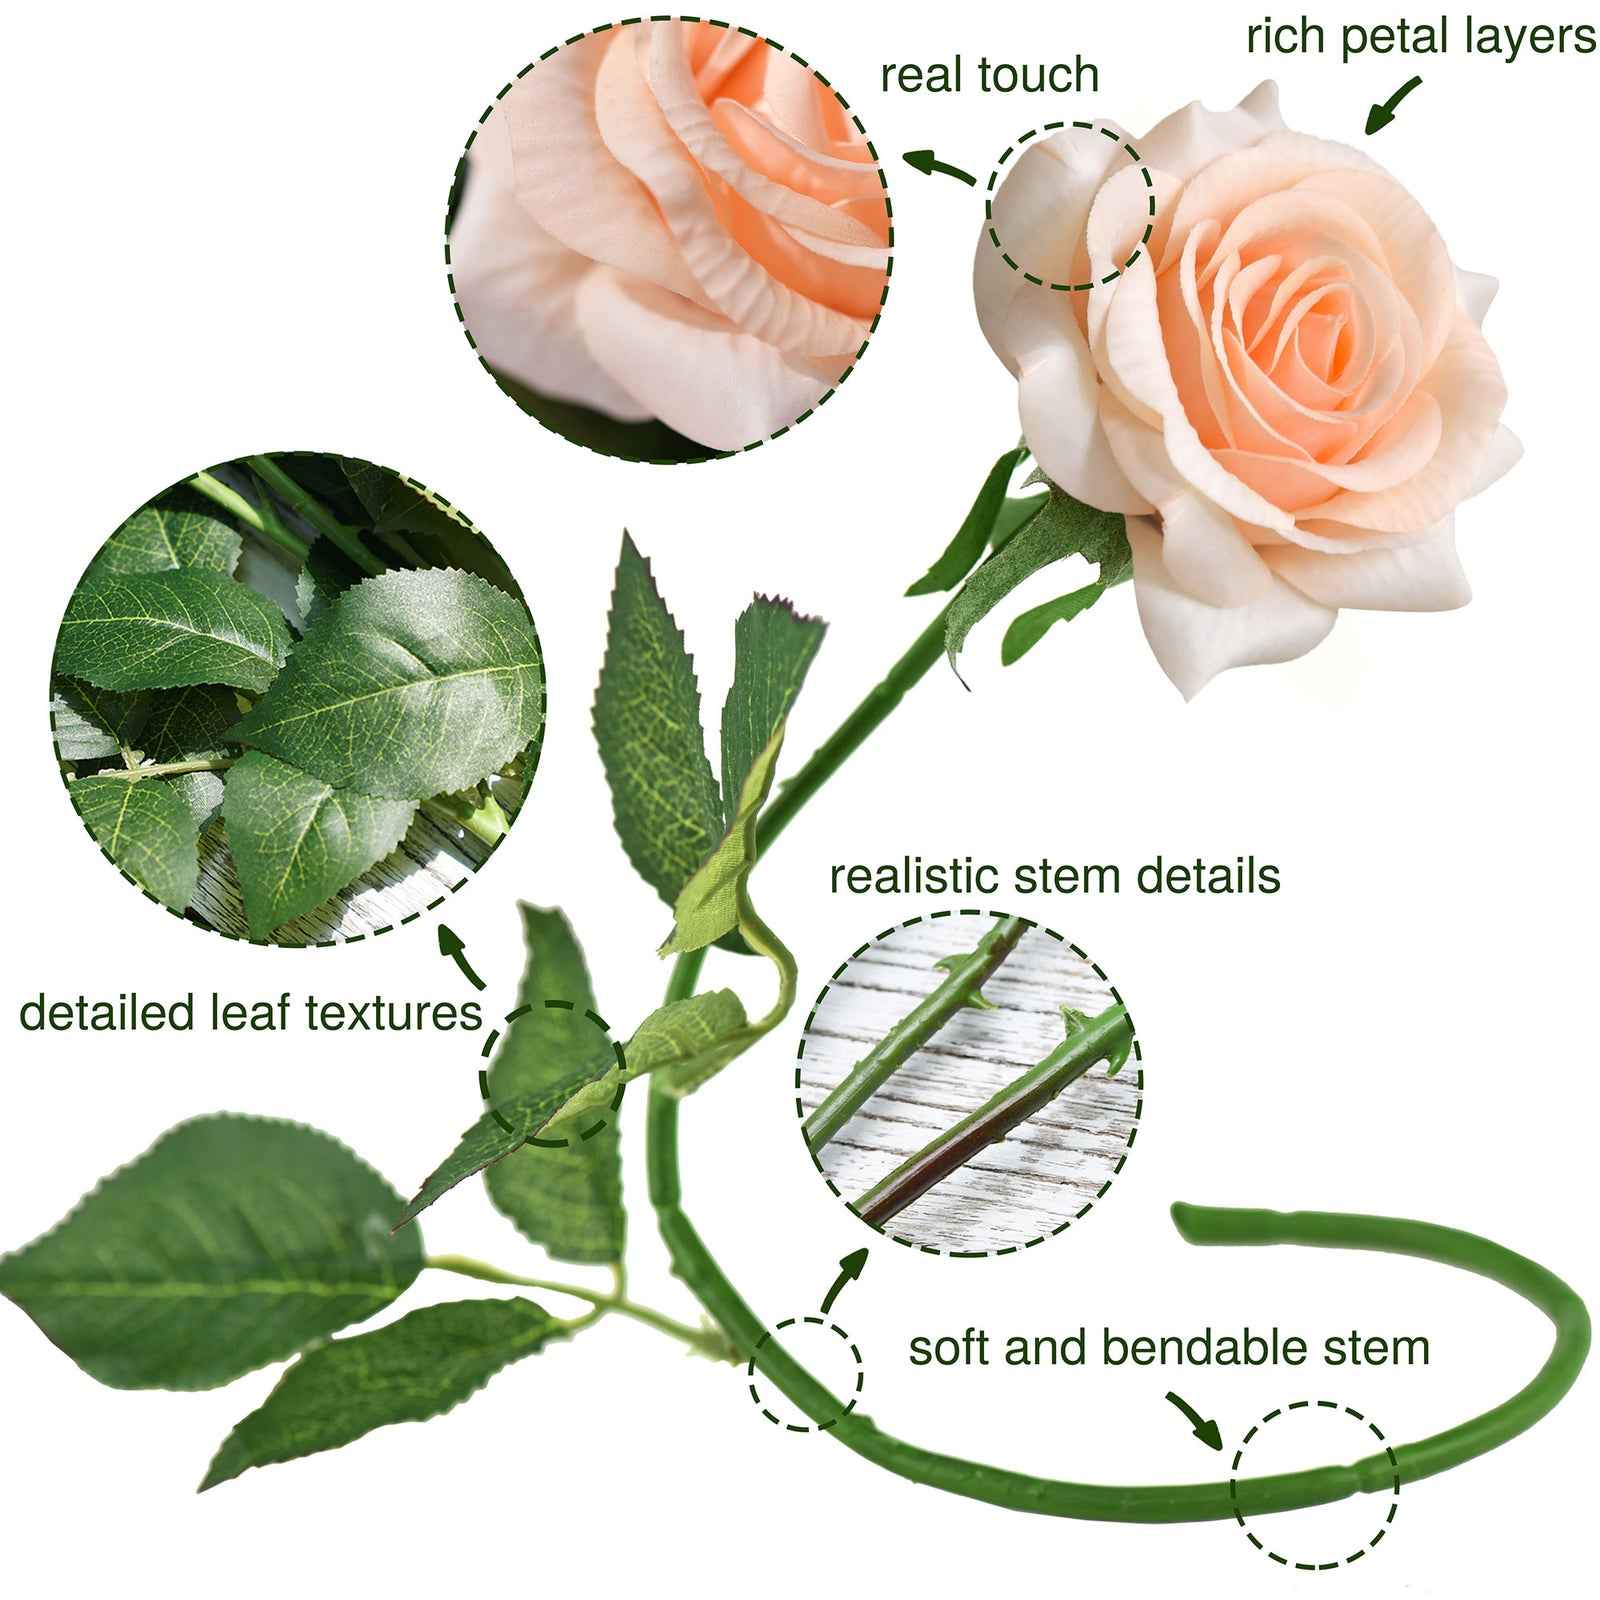 Apricot Pink Real Touch Roses Silk Artificial Flowers ‘Petals Feel and Look like Fresh Roses' 10 Stems